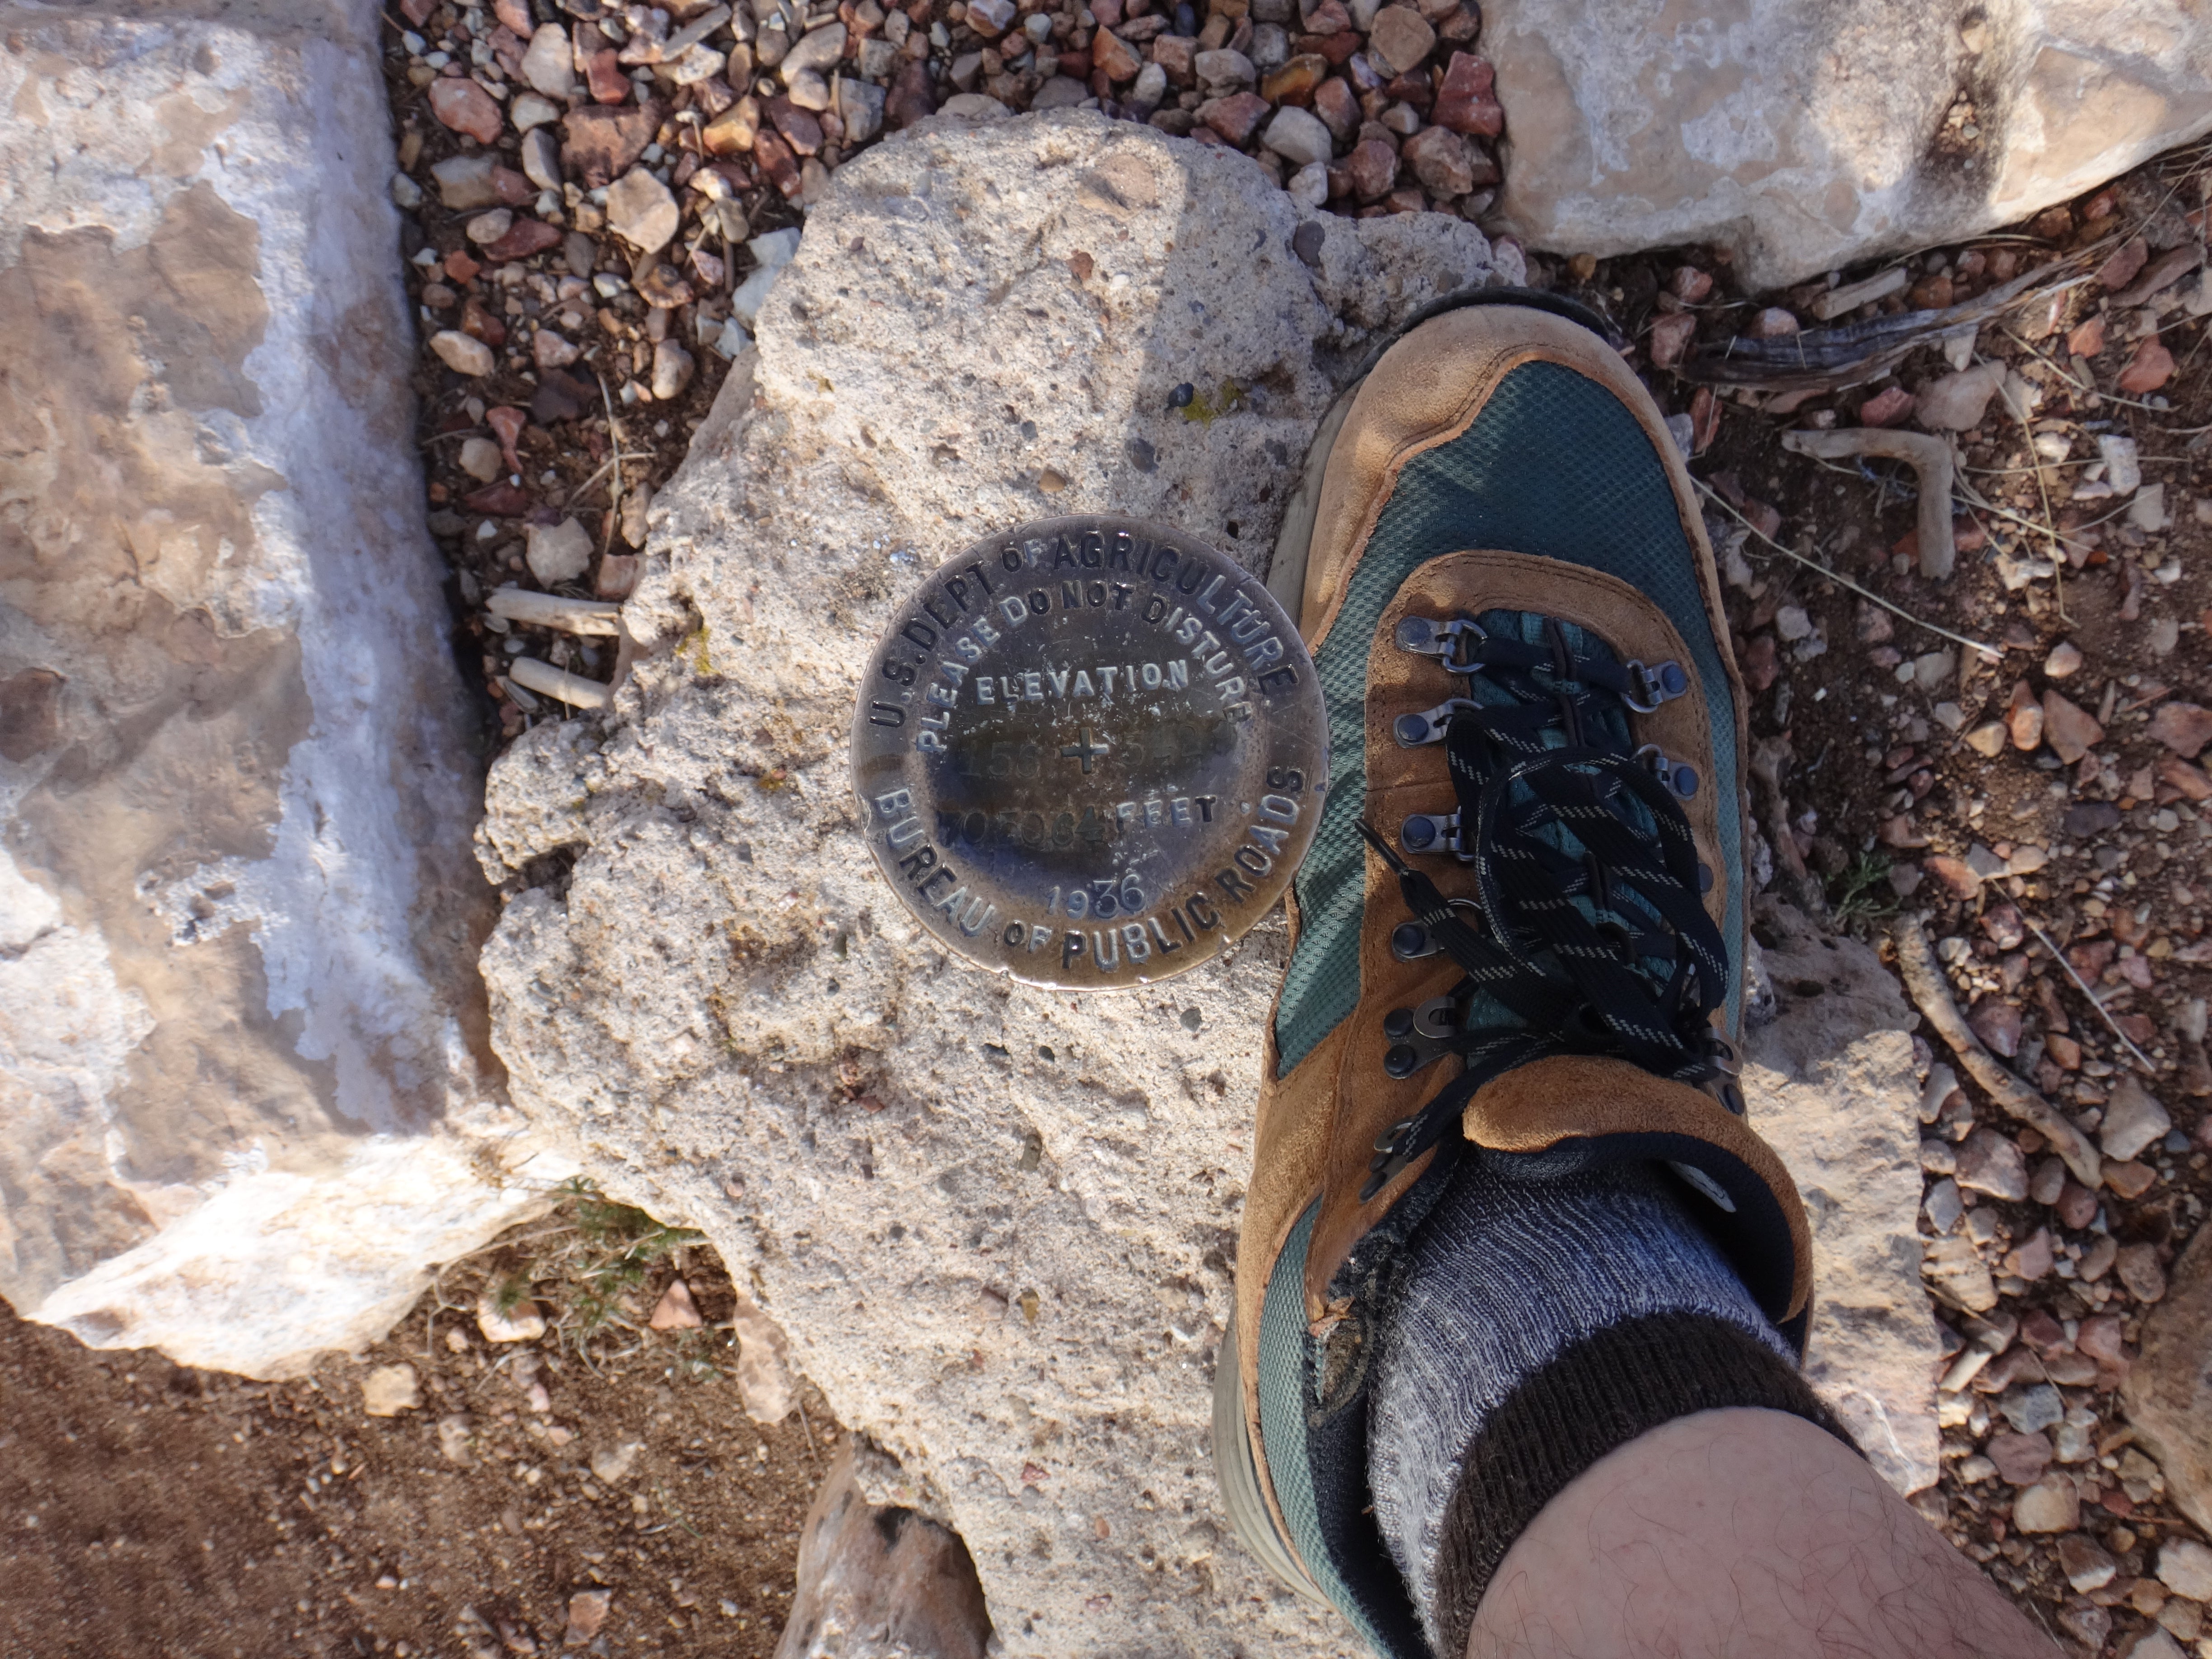 Danner South Rim Boots – Kit Fox Outfitters